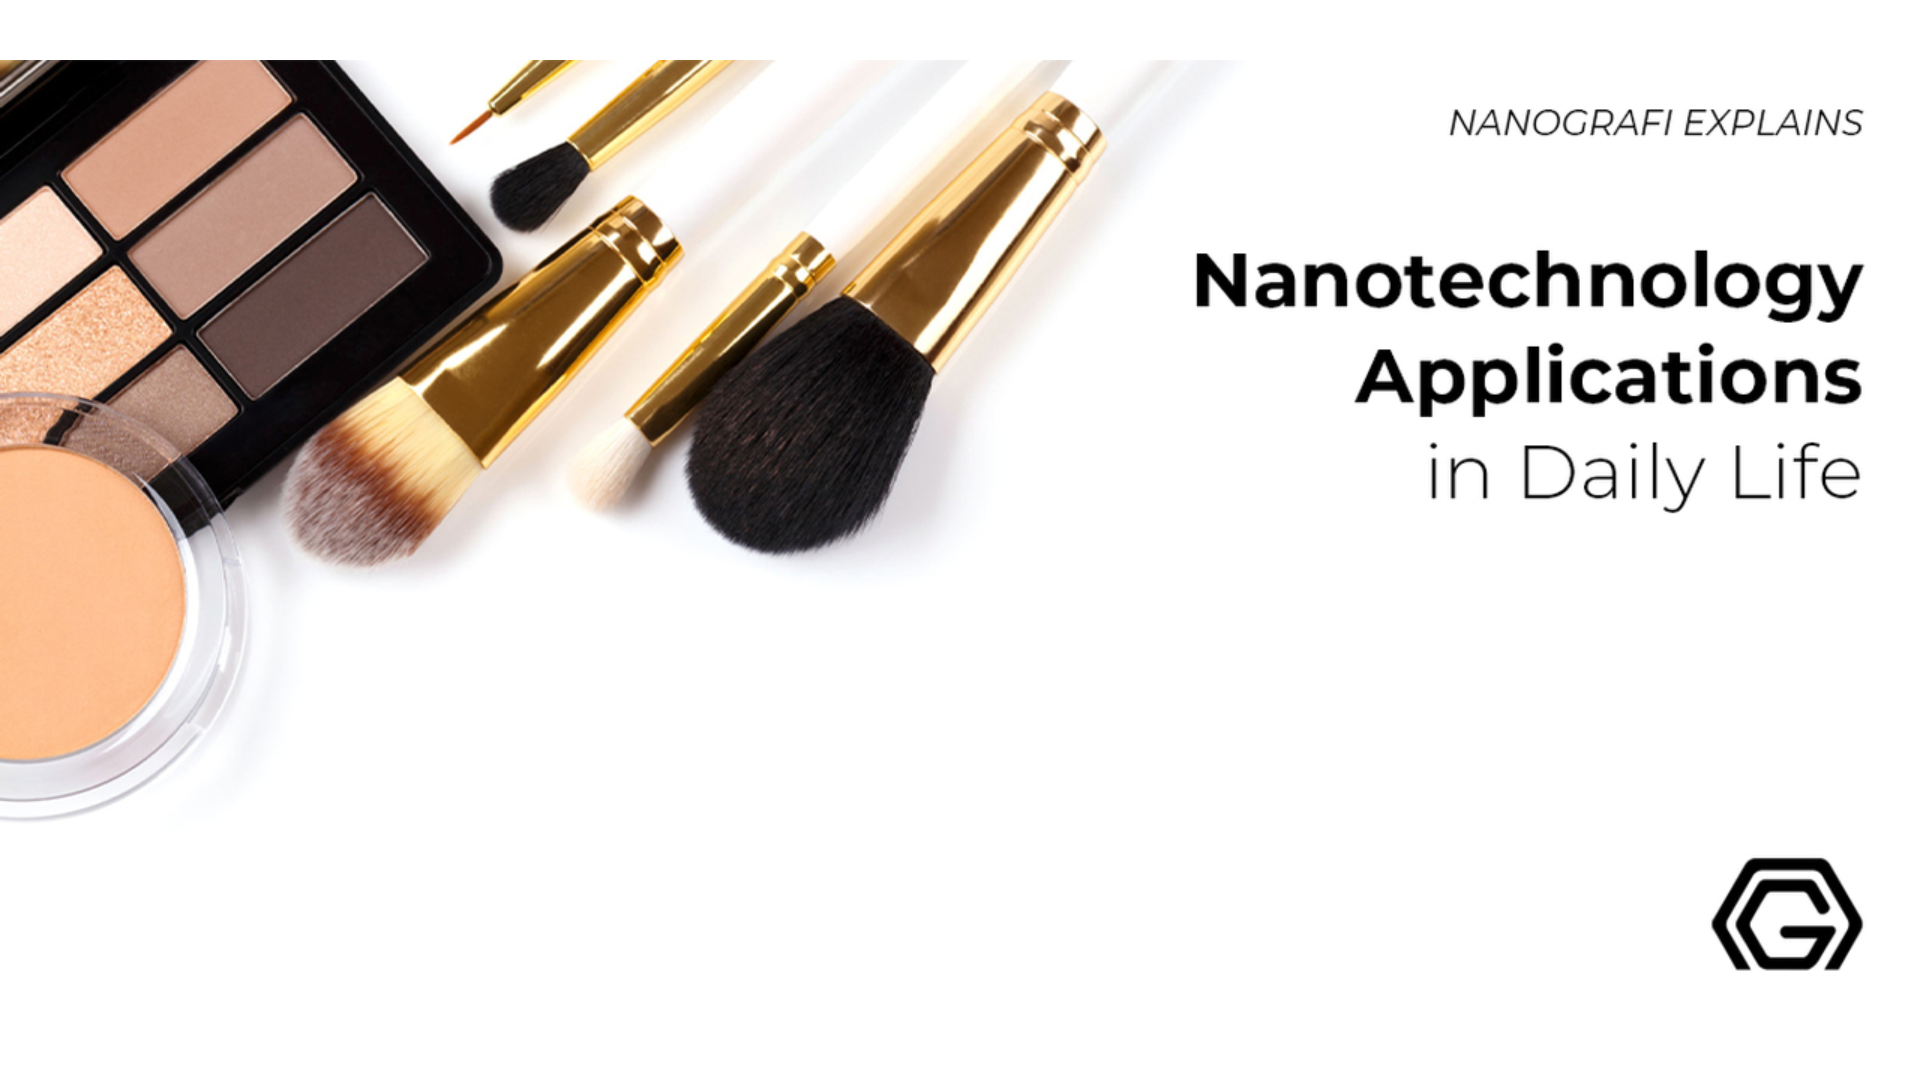 Nanotechnology applications in daily life